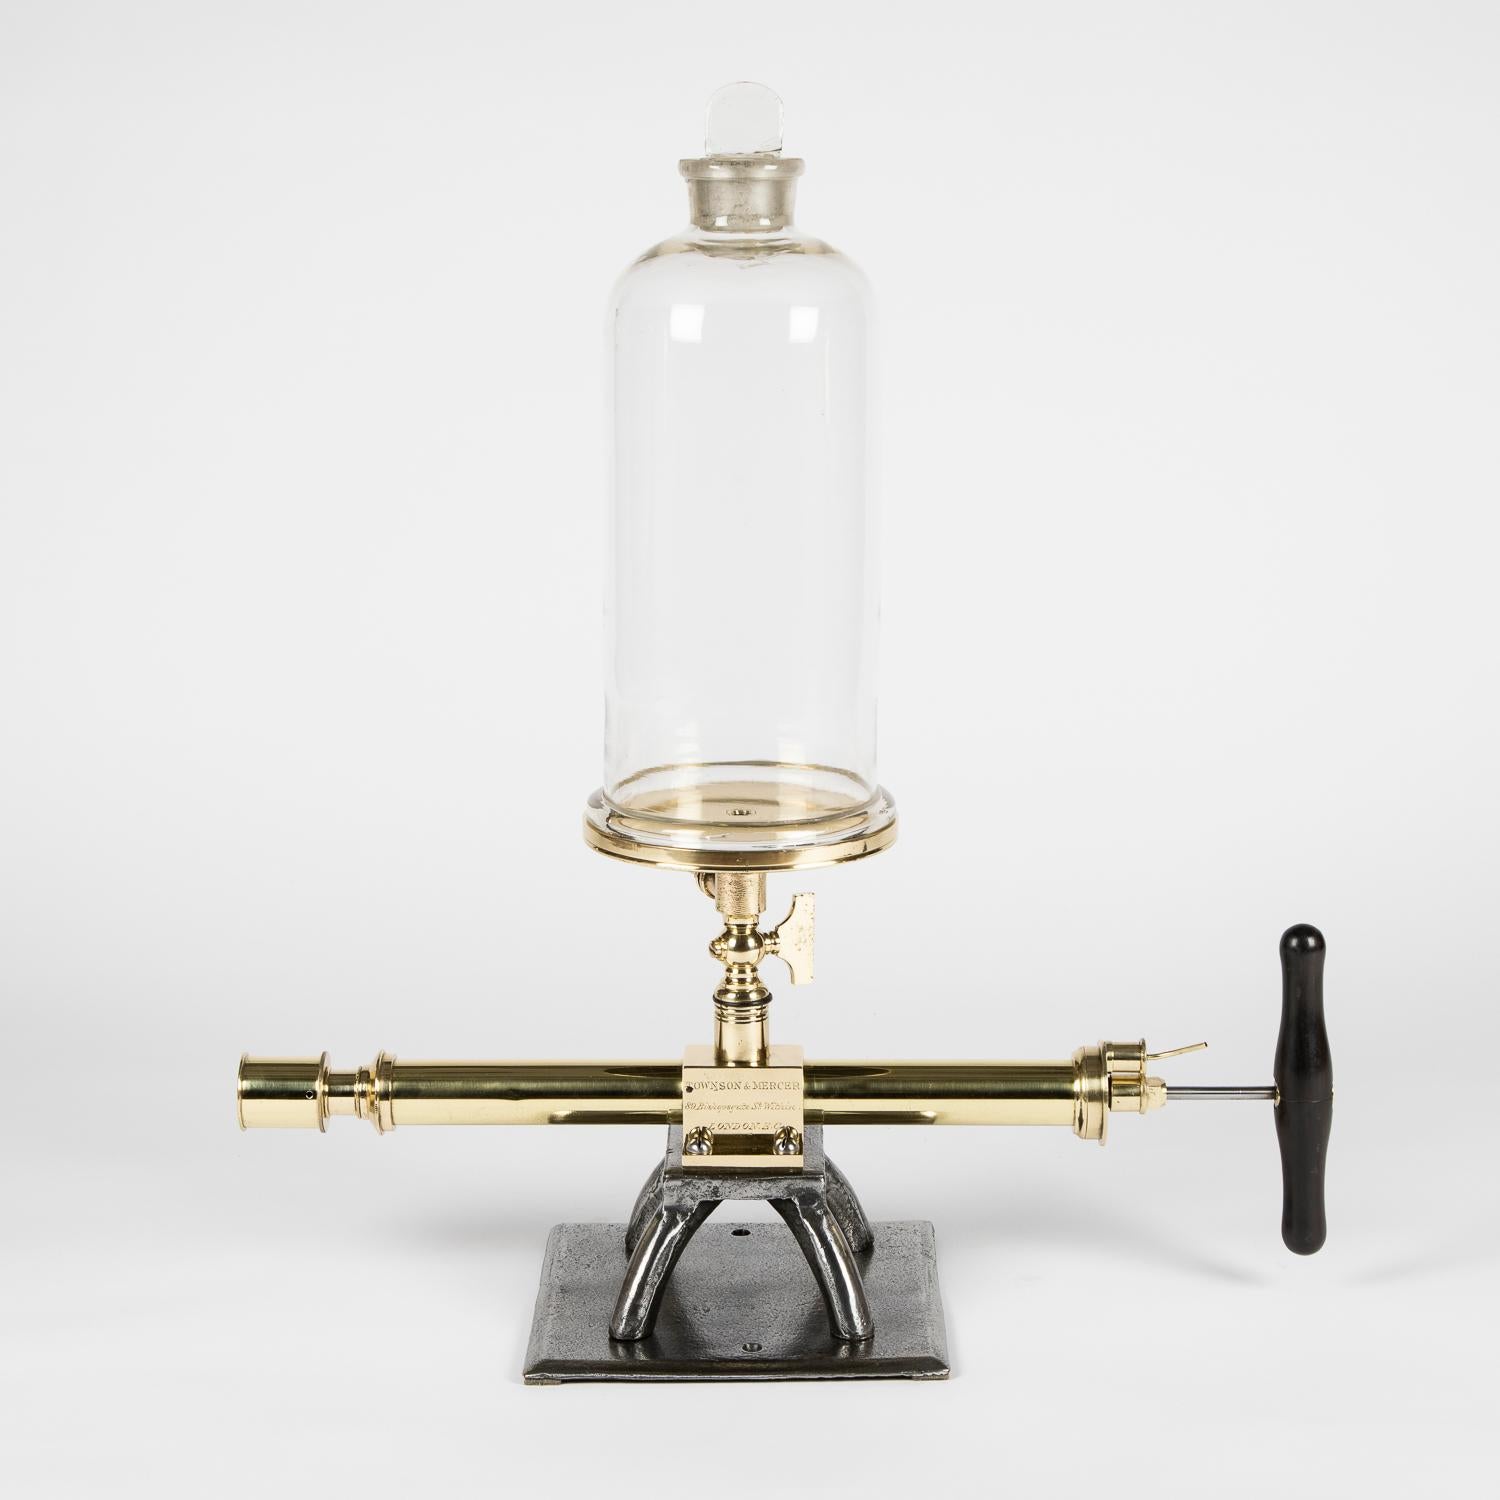 A Tate's double acting vacuum pump by Townson & Mercer, of Bishopsgate, London. circa 1890.

With glass bell jar, 7 inch diameter.

 

Literature: 

Catalogue of chemical apparatus and pure chemicals sold by Townson & Mercer. 1888. Page: